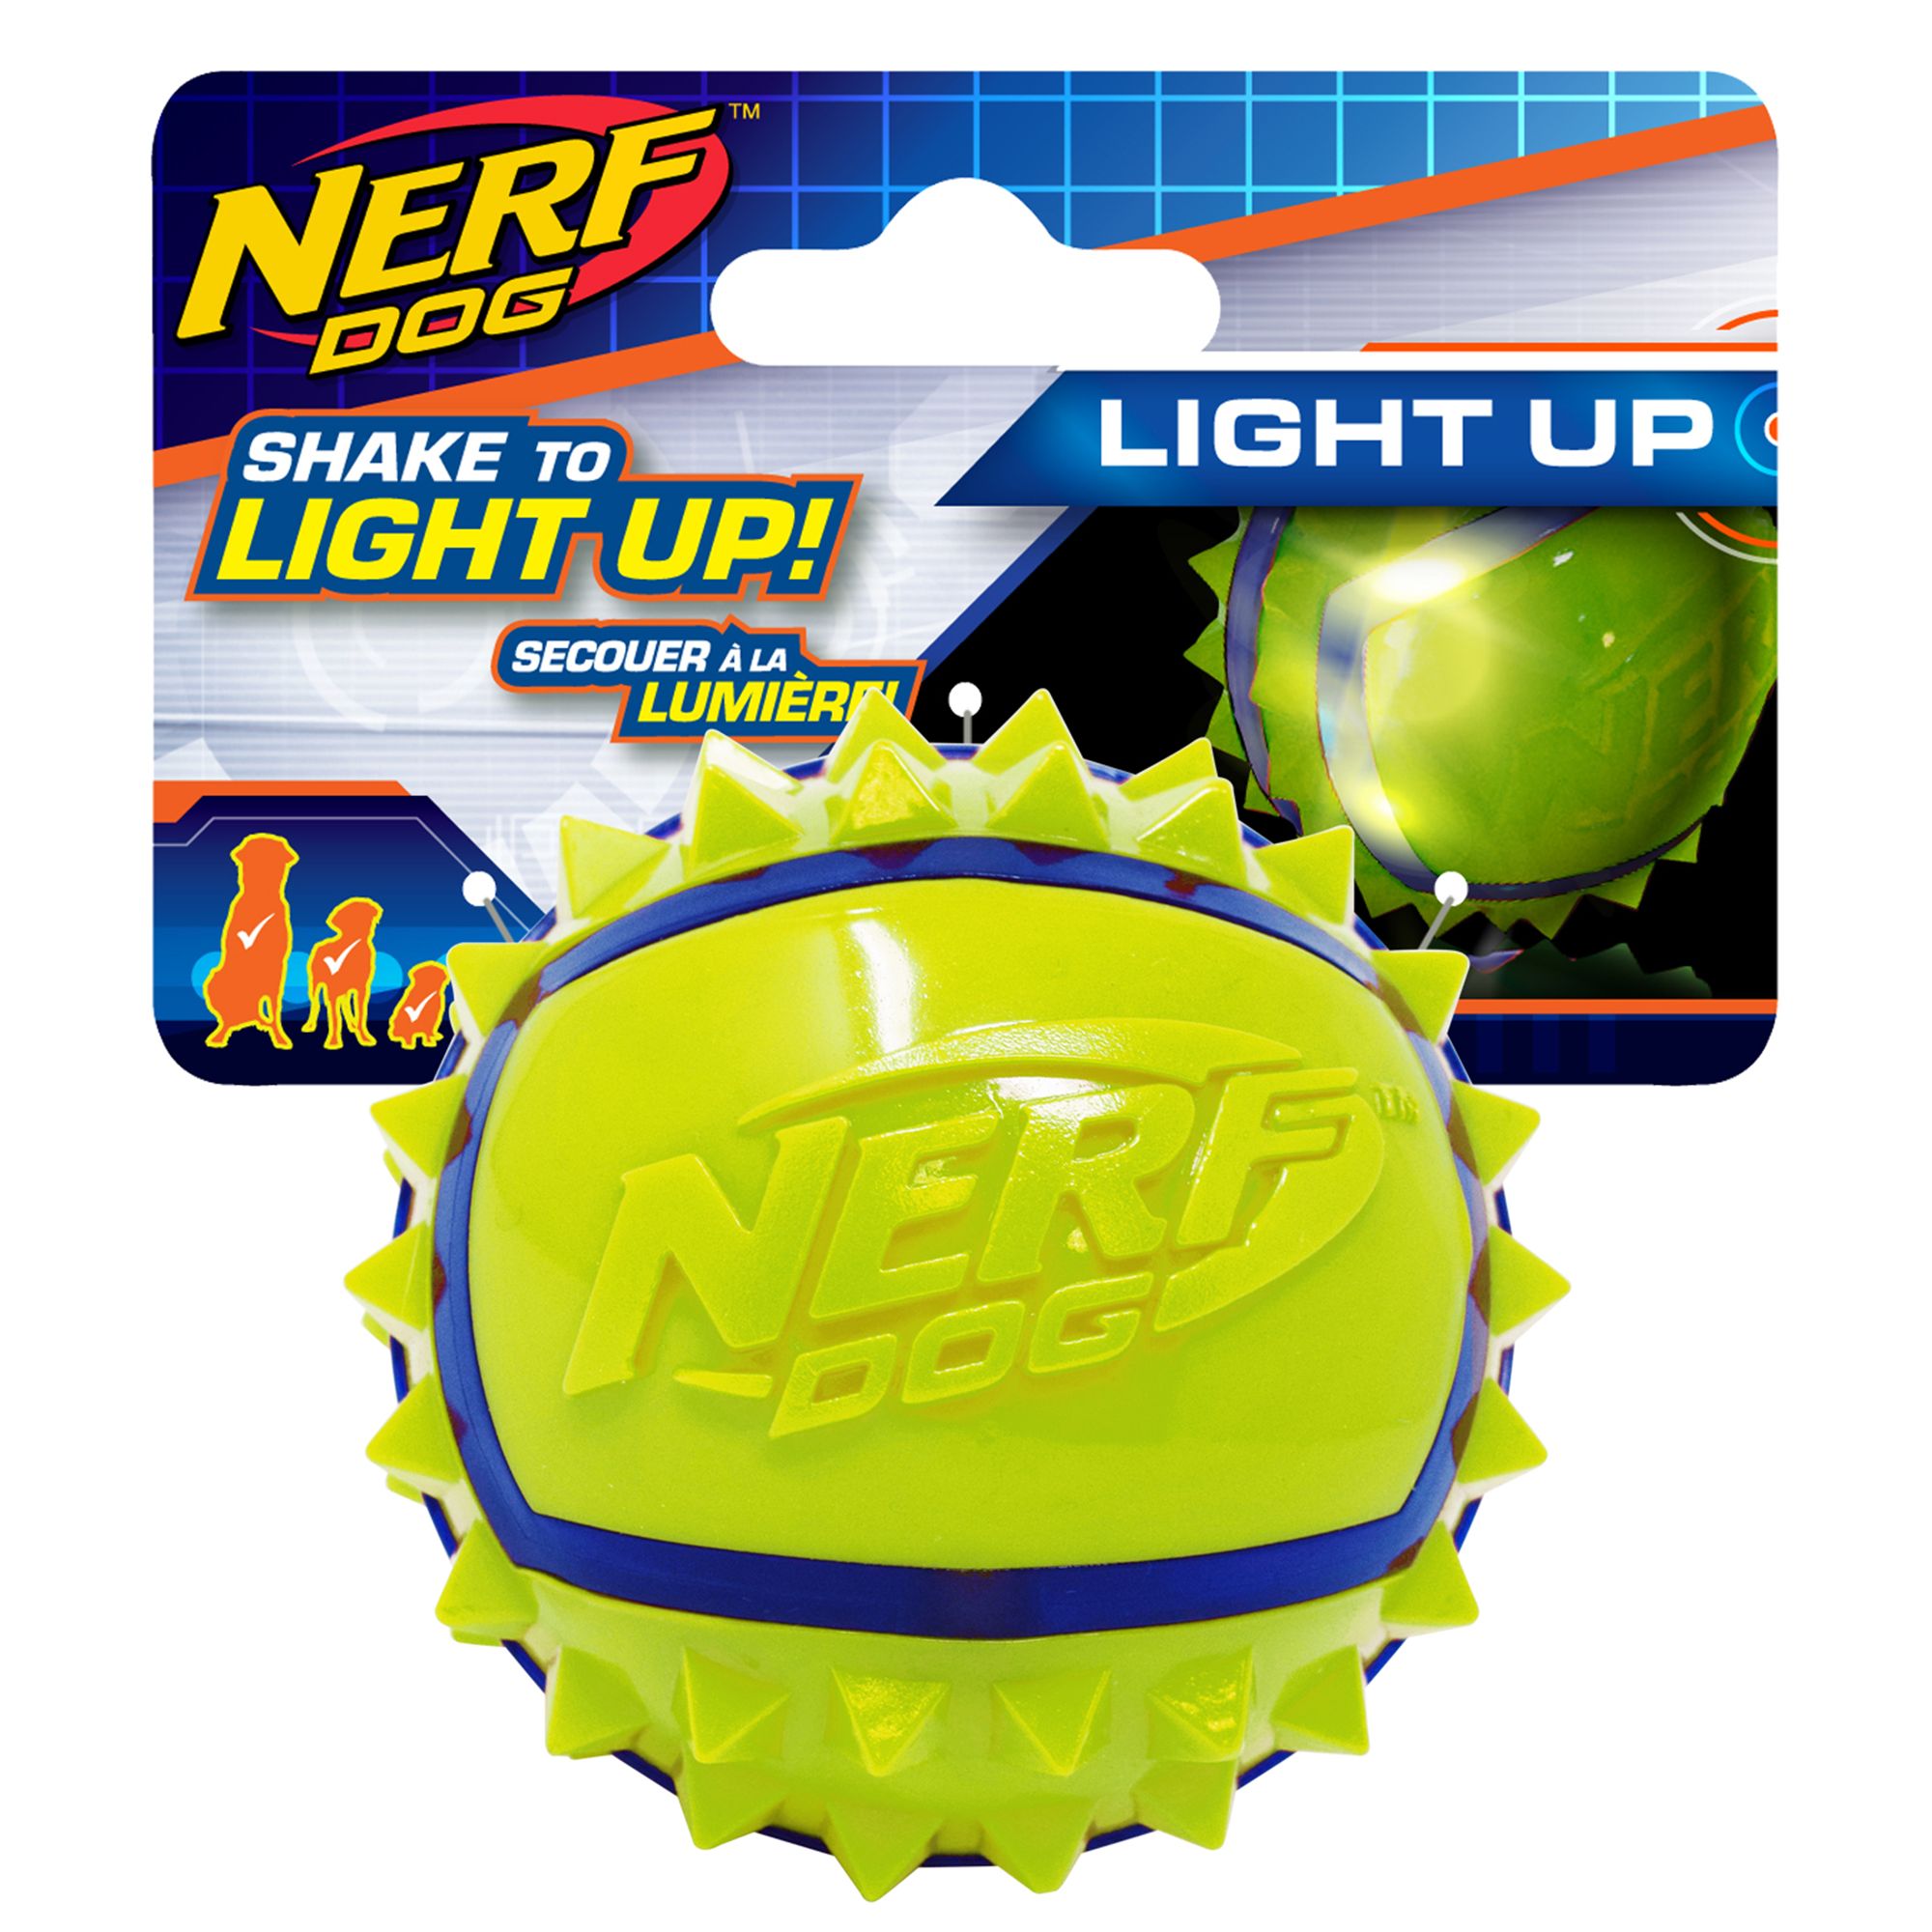 balls for dogs that light up